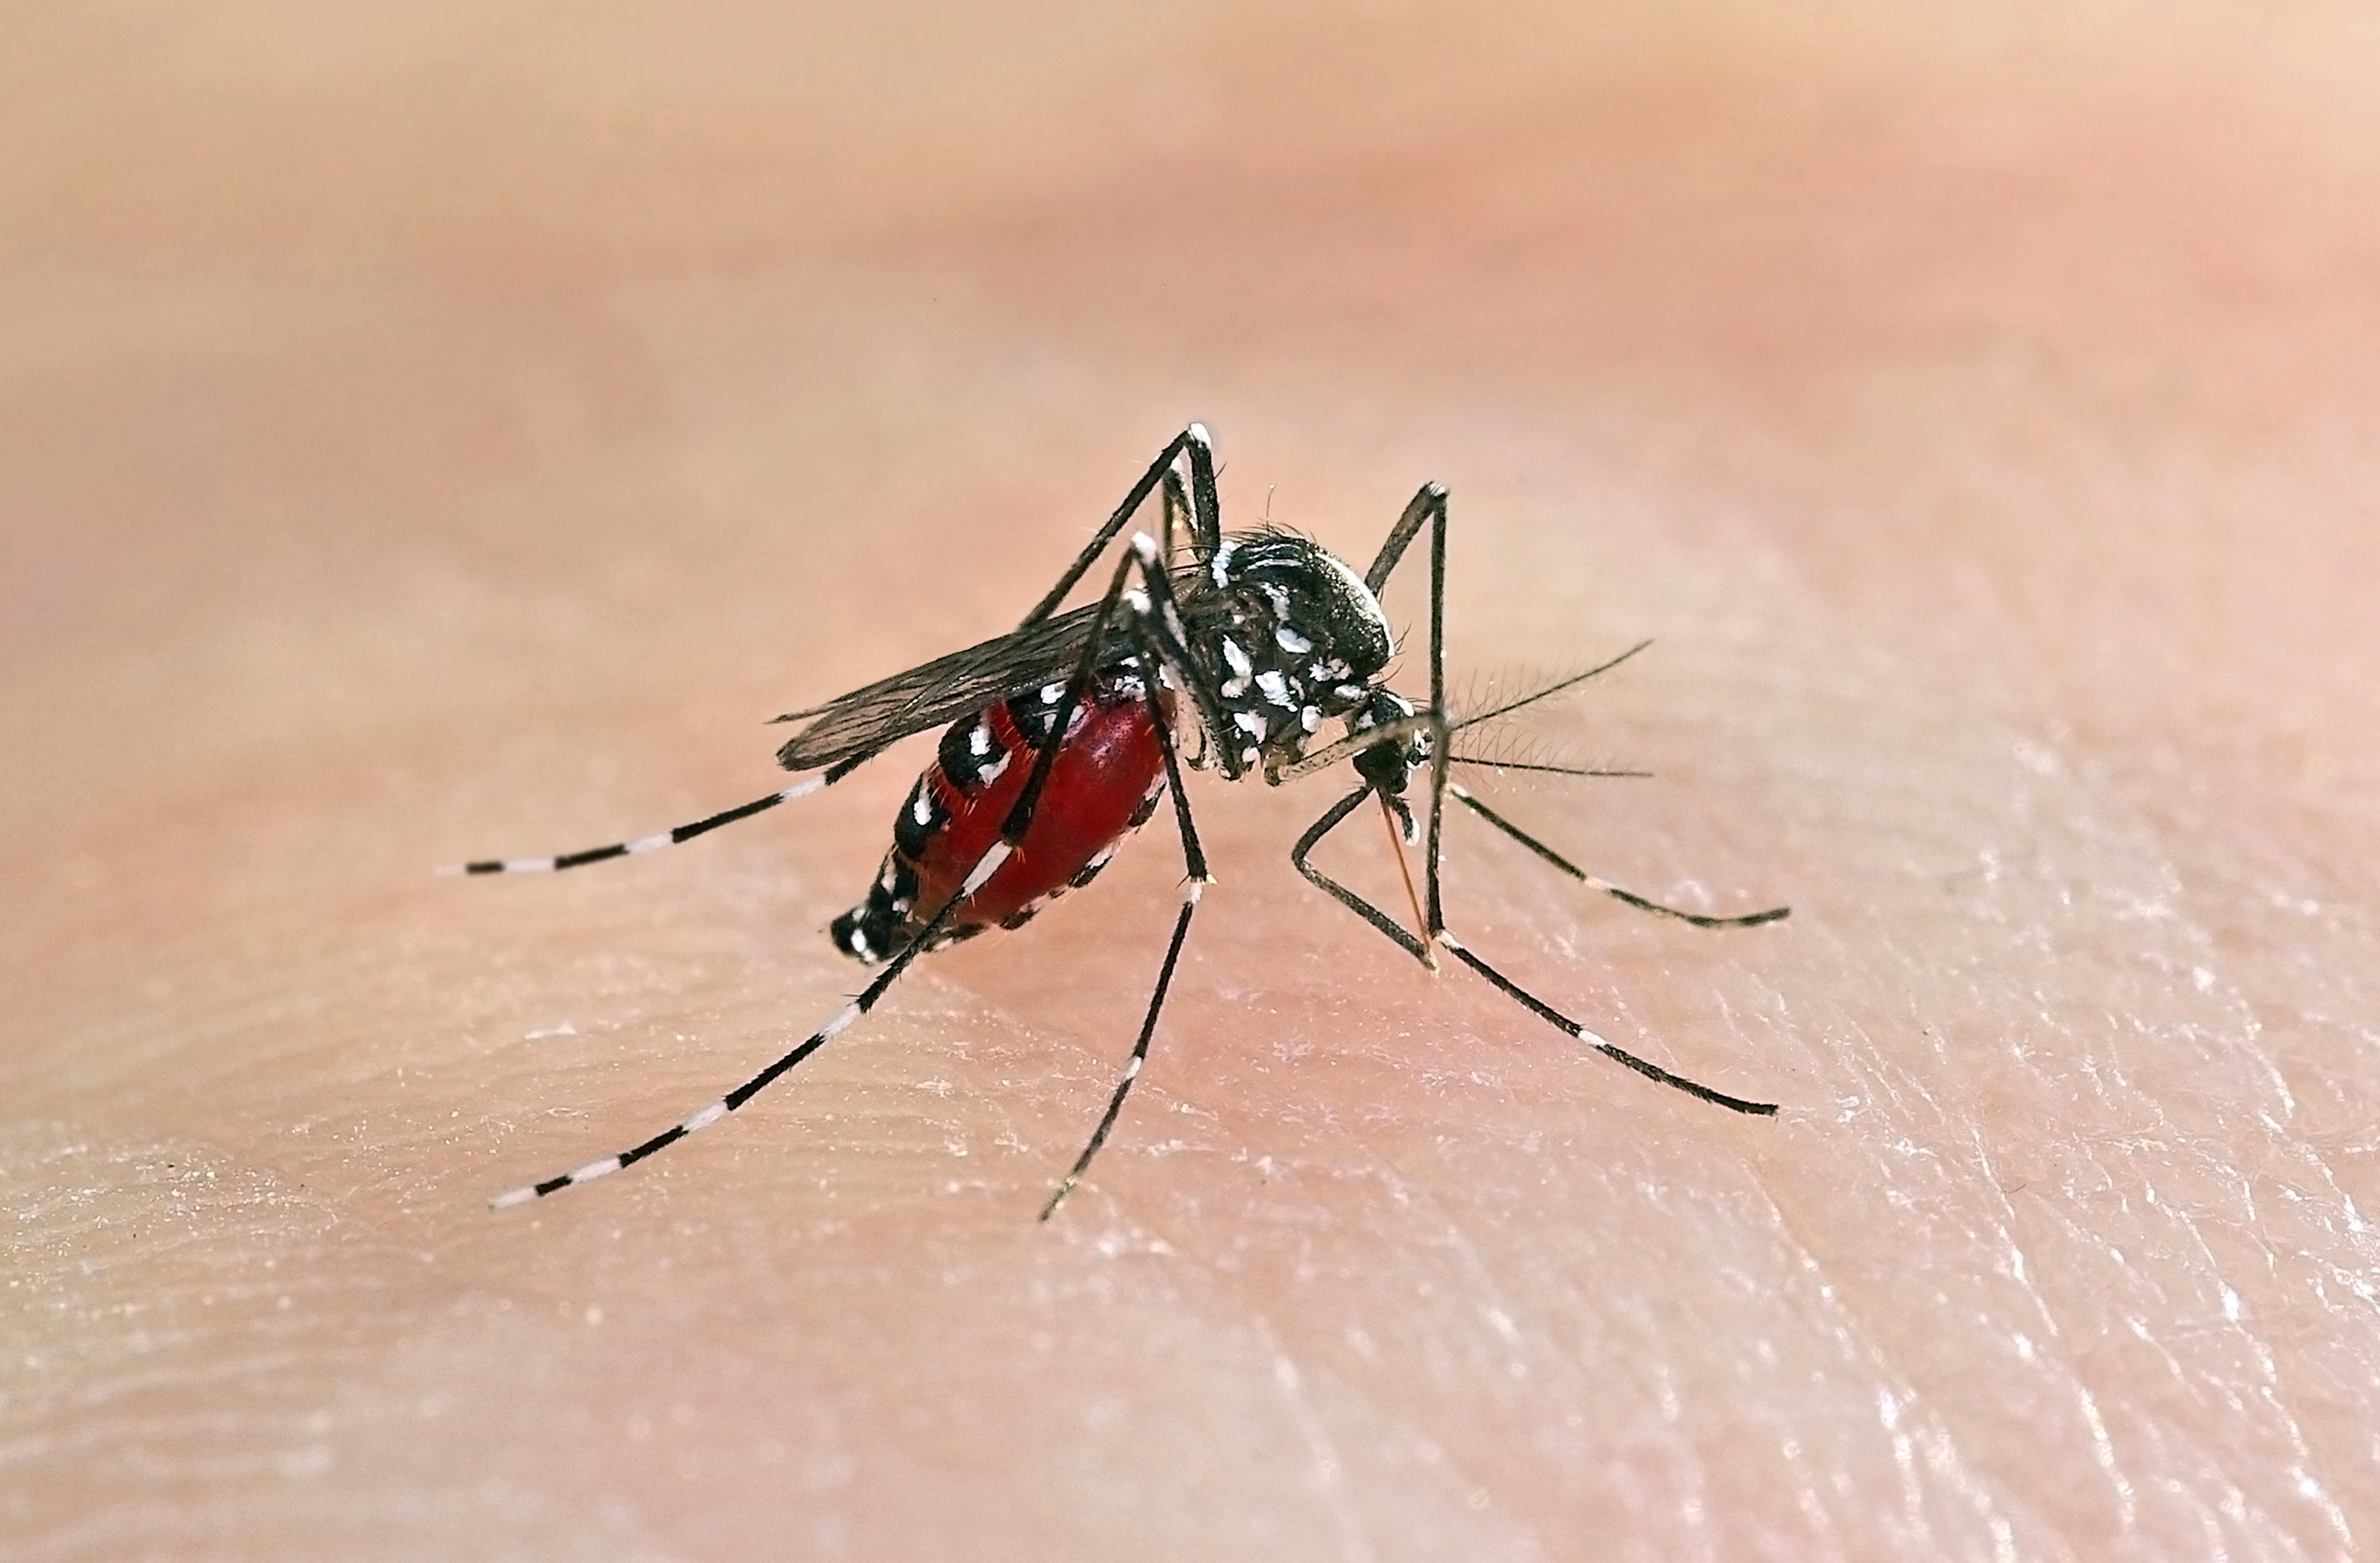 Tiger mosquitoes help spread tropical diseases. Photo: Shutterstoc